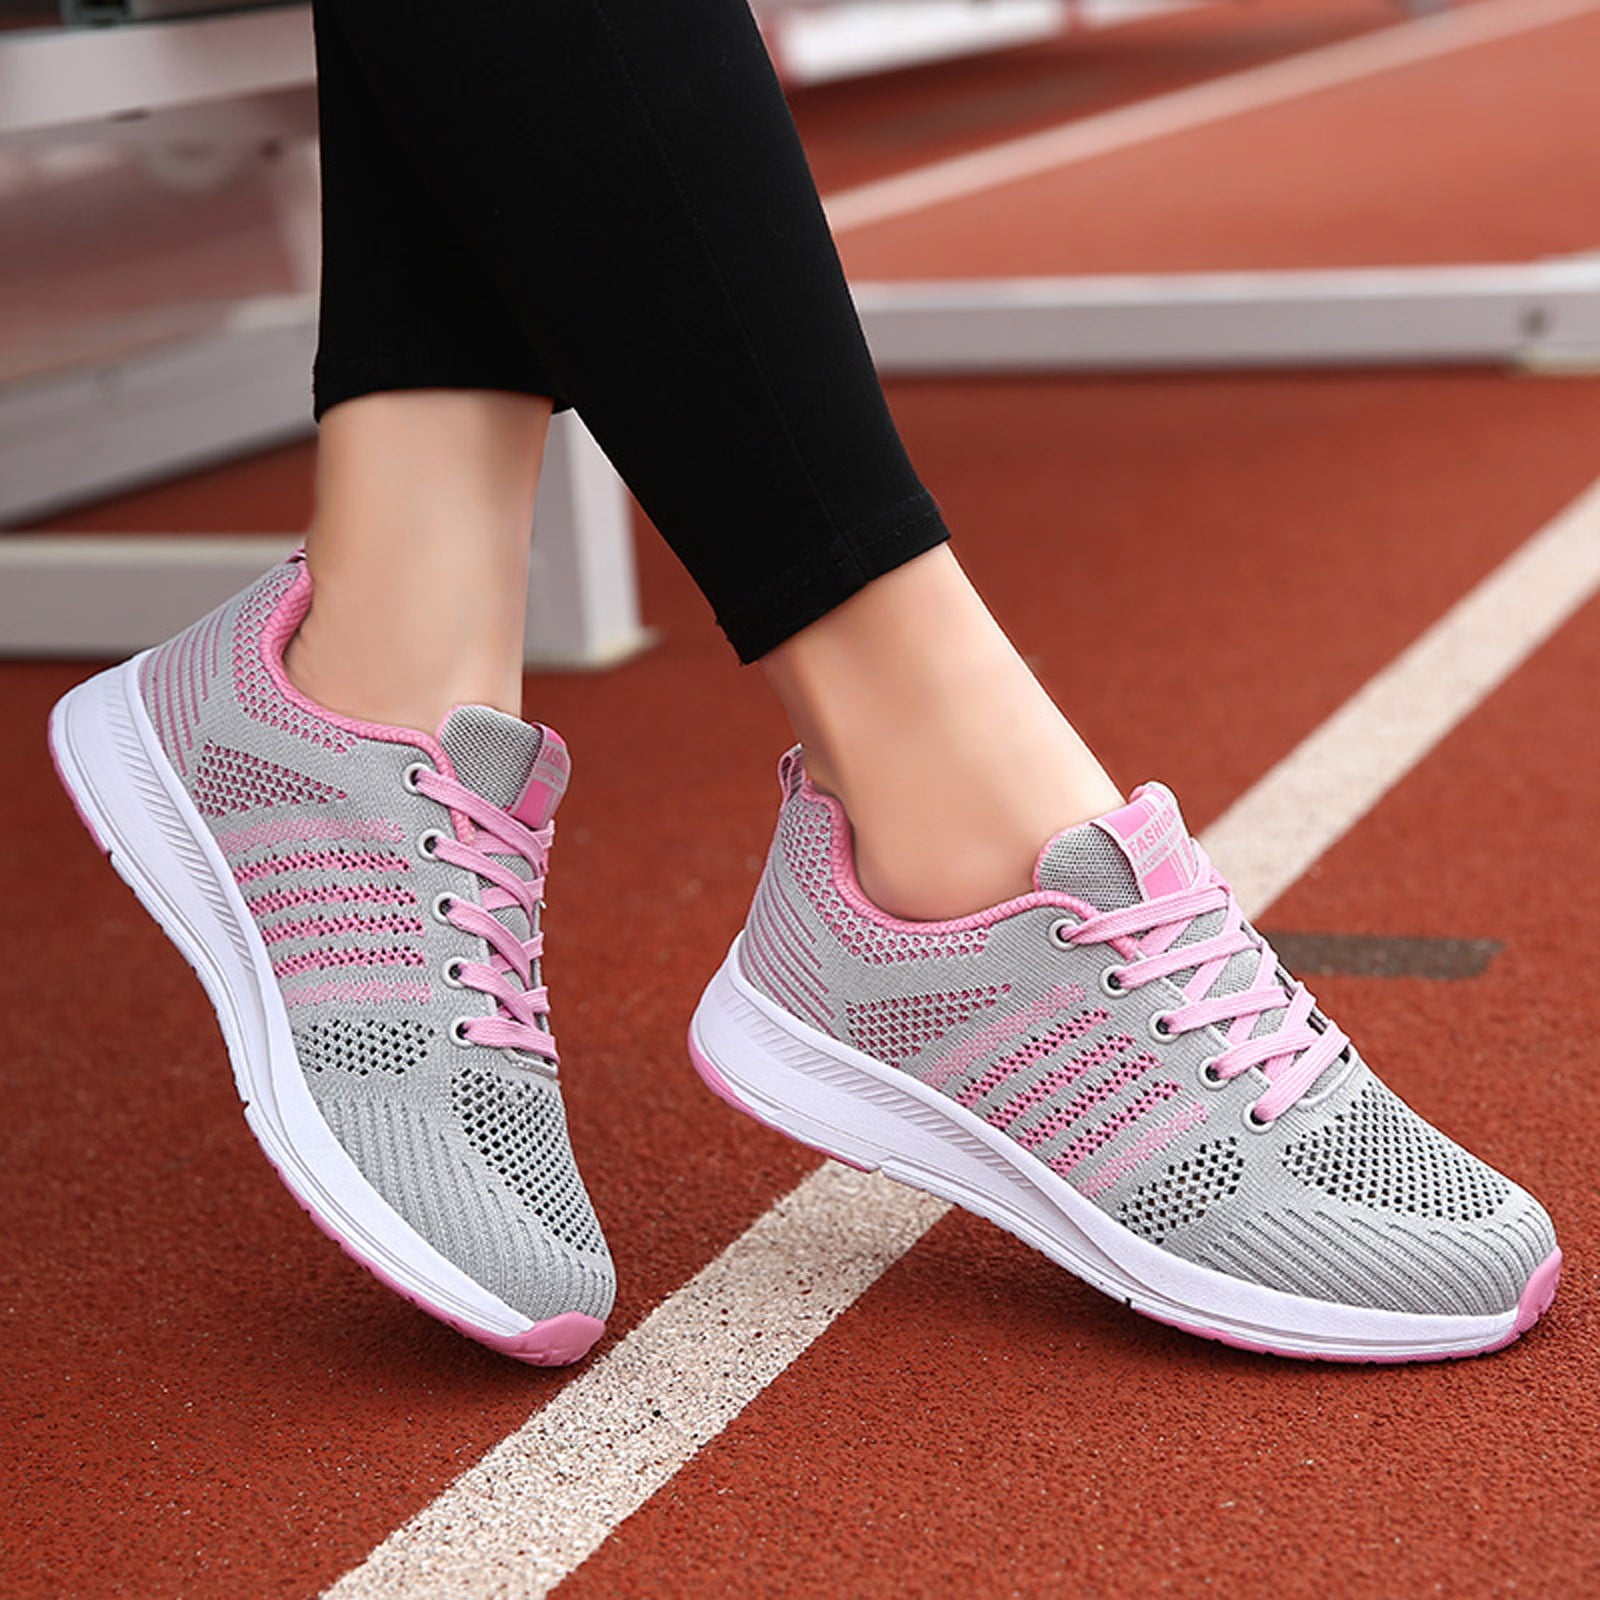 Sandals for Women Solid Runing Mesh Color Sports Women Shoes Breathable  Outdoor Sneakers Shoes Women's Sneakers (Pink #3, 8.5)